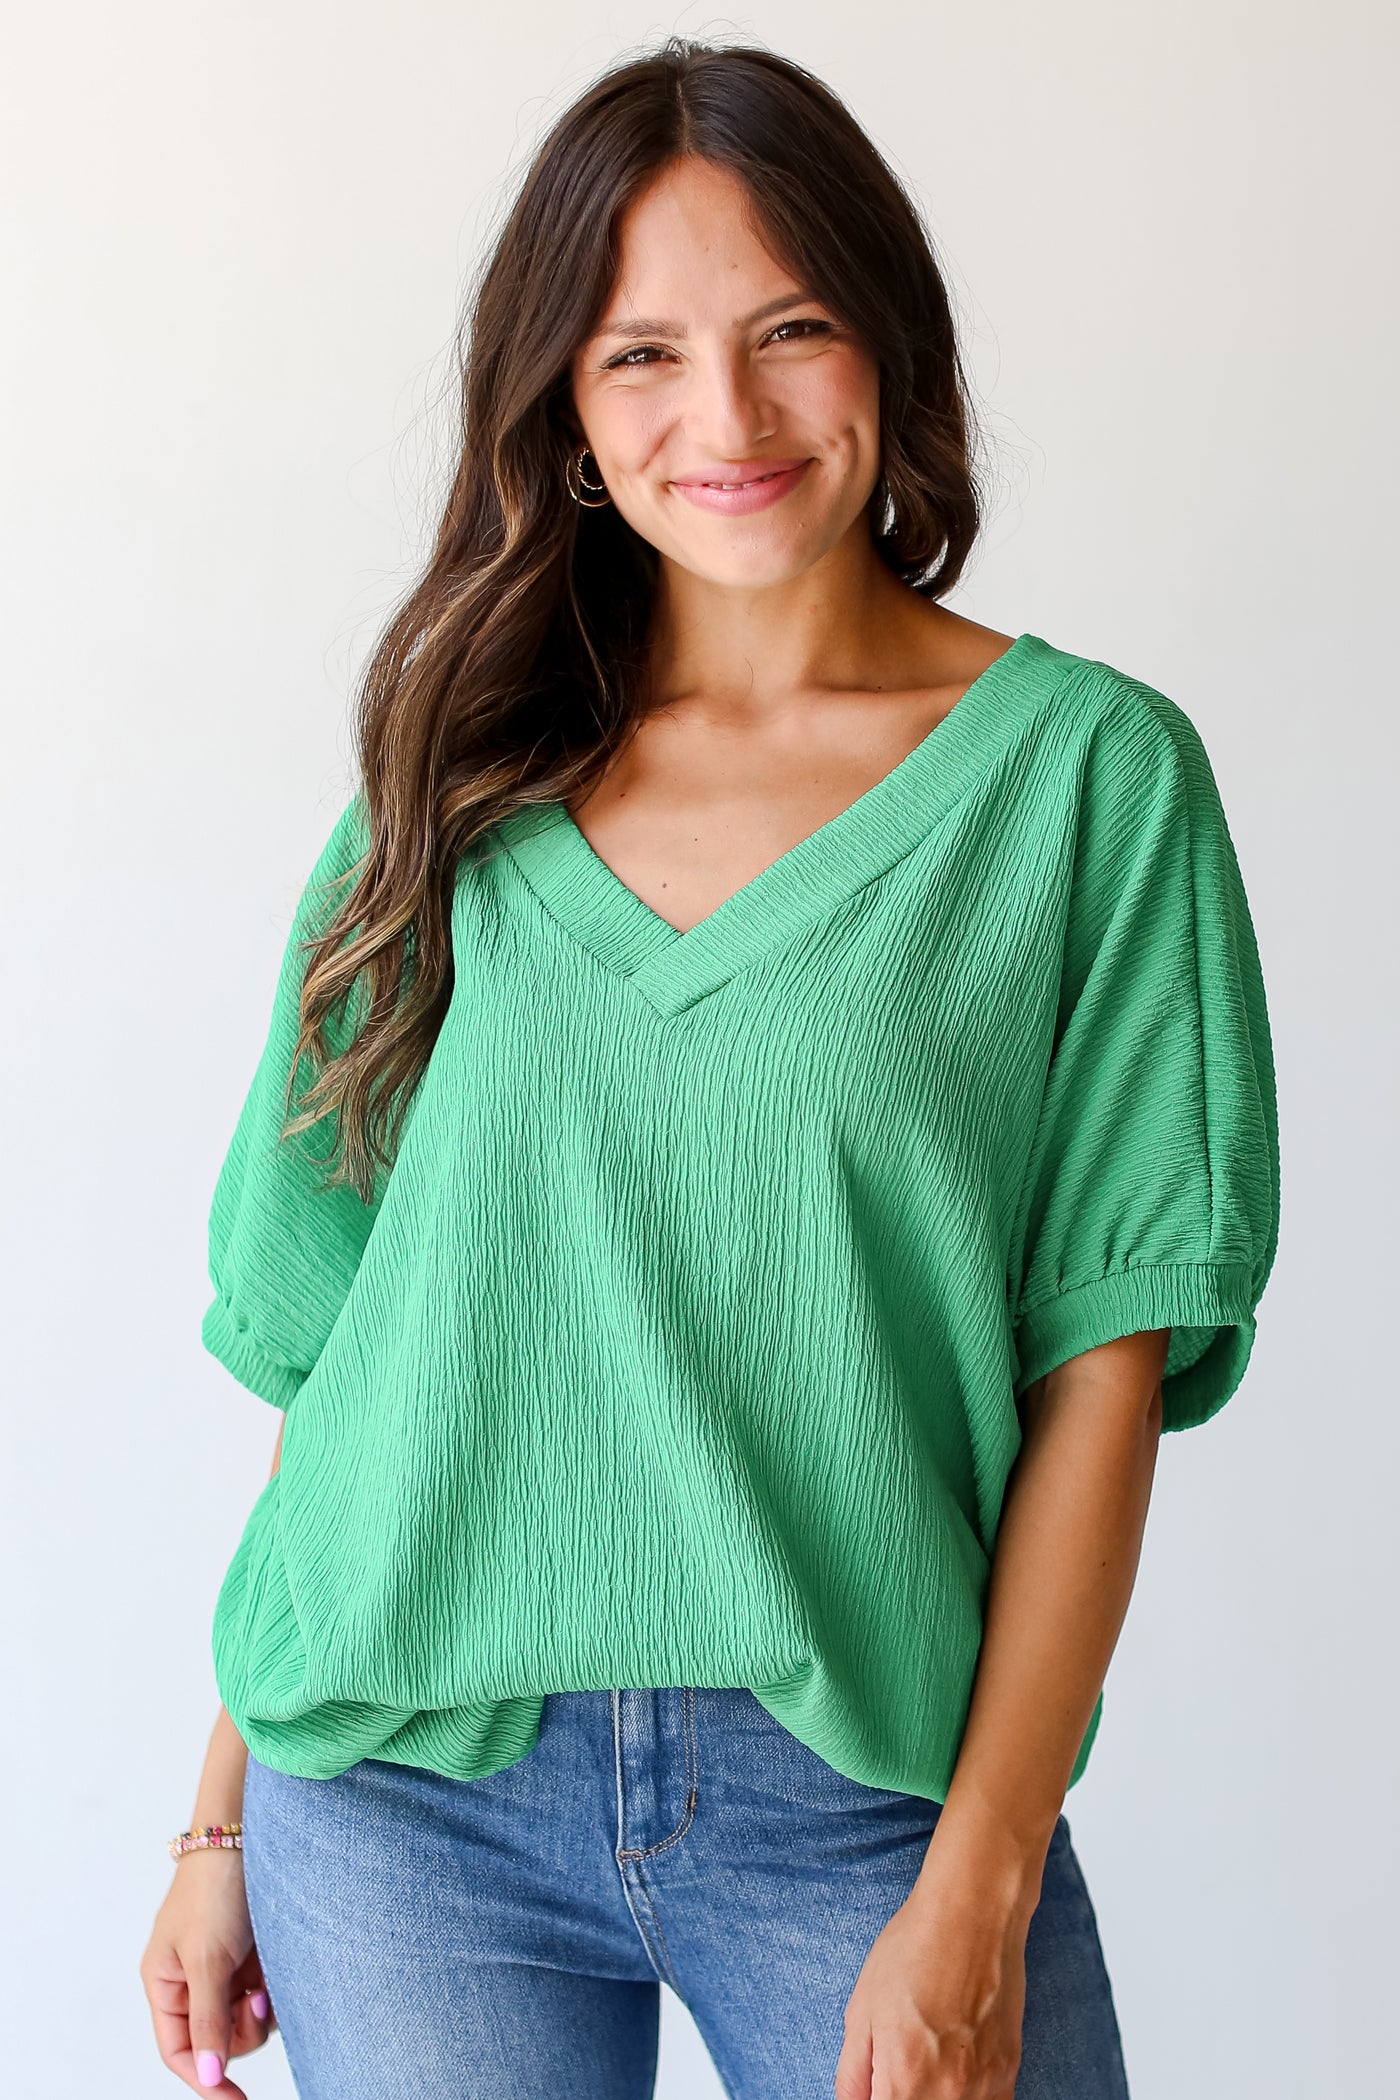 kelly green Textured Blouse close up